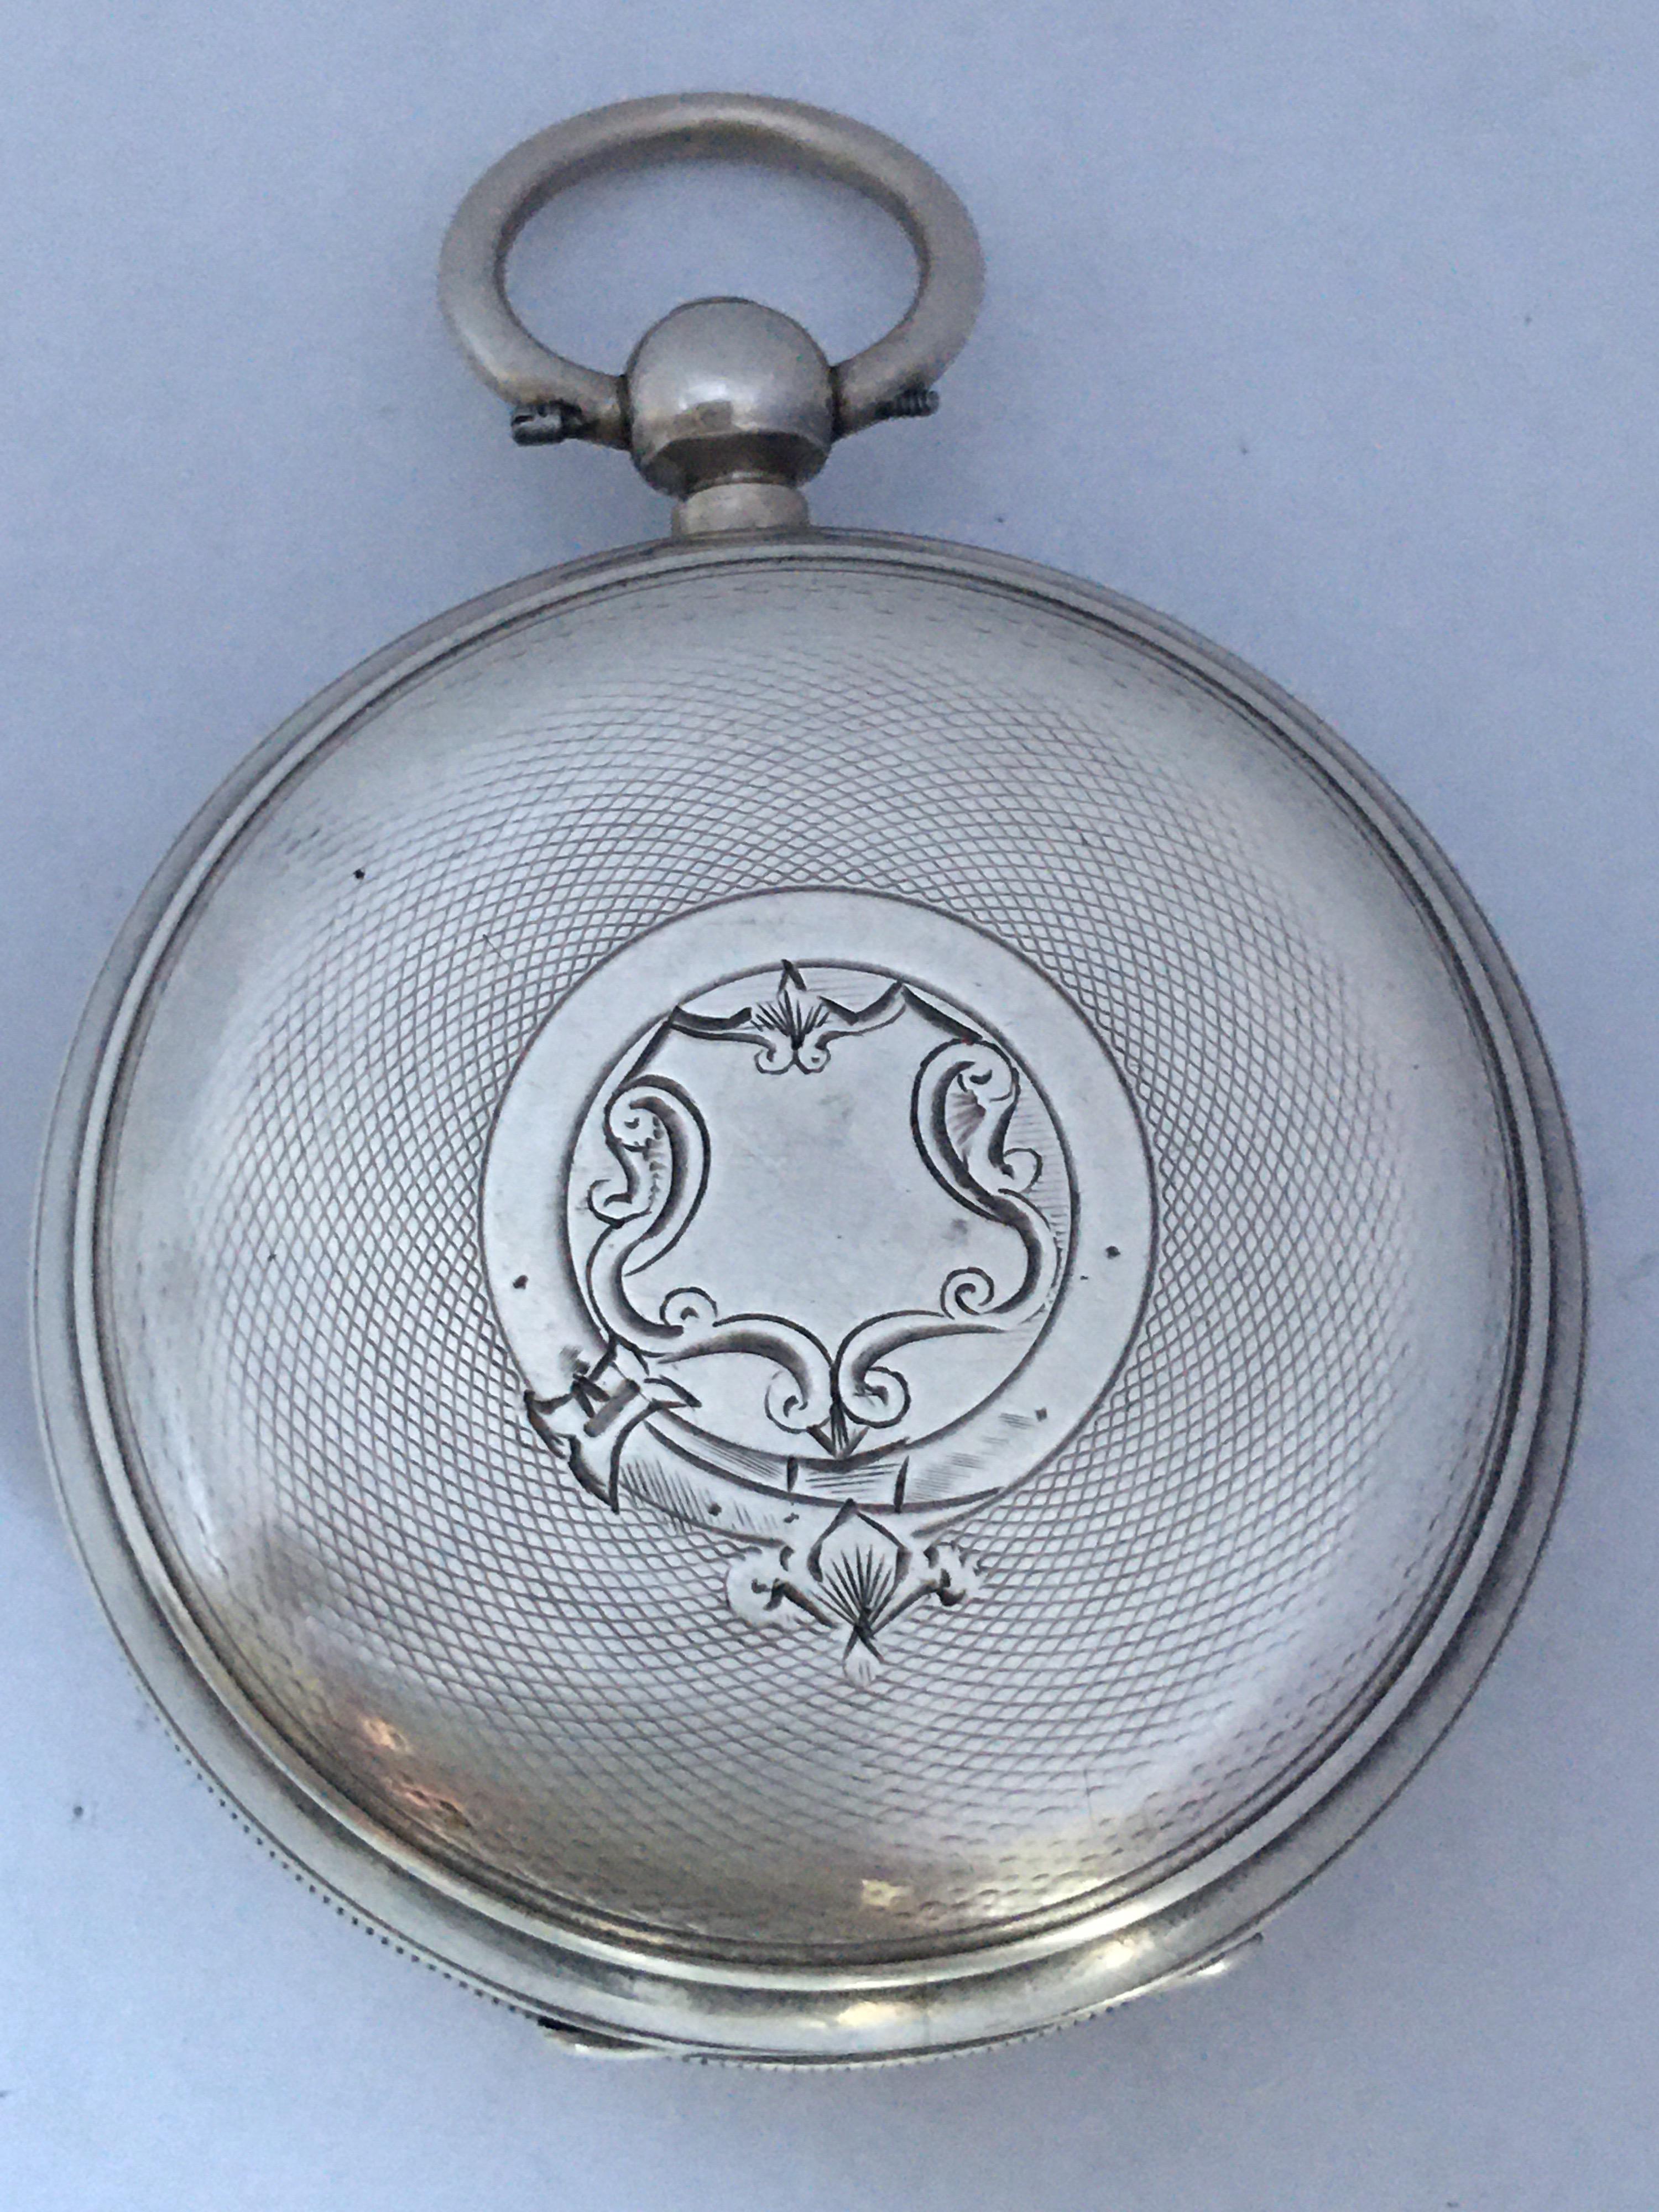 This beautiful pre-owned antique silver pocket watch is in good working condition and it is ticking well. It is recently been serviced and it runs well. Visible signs of ageing and wear with small scratches and tiny dents on the silver watch case